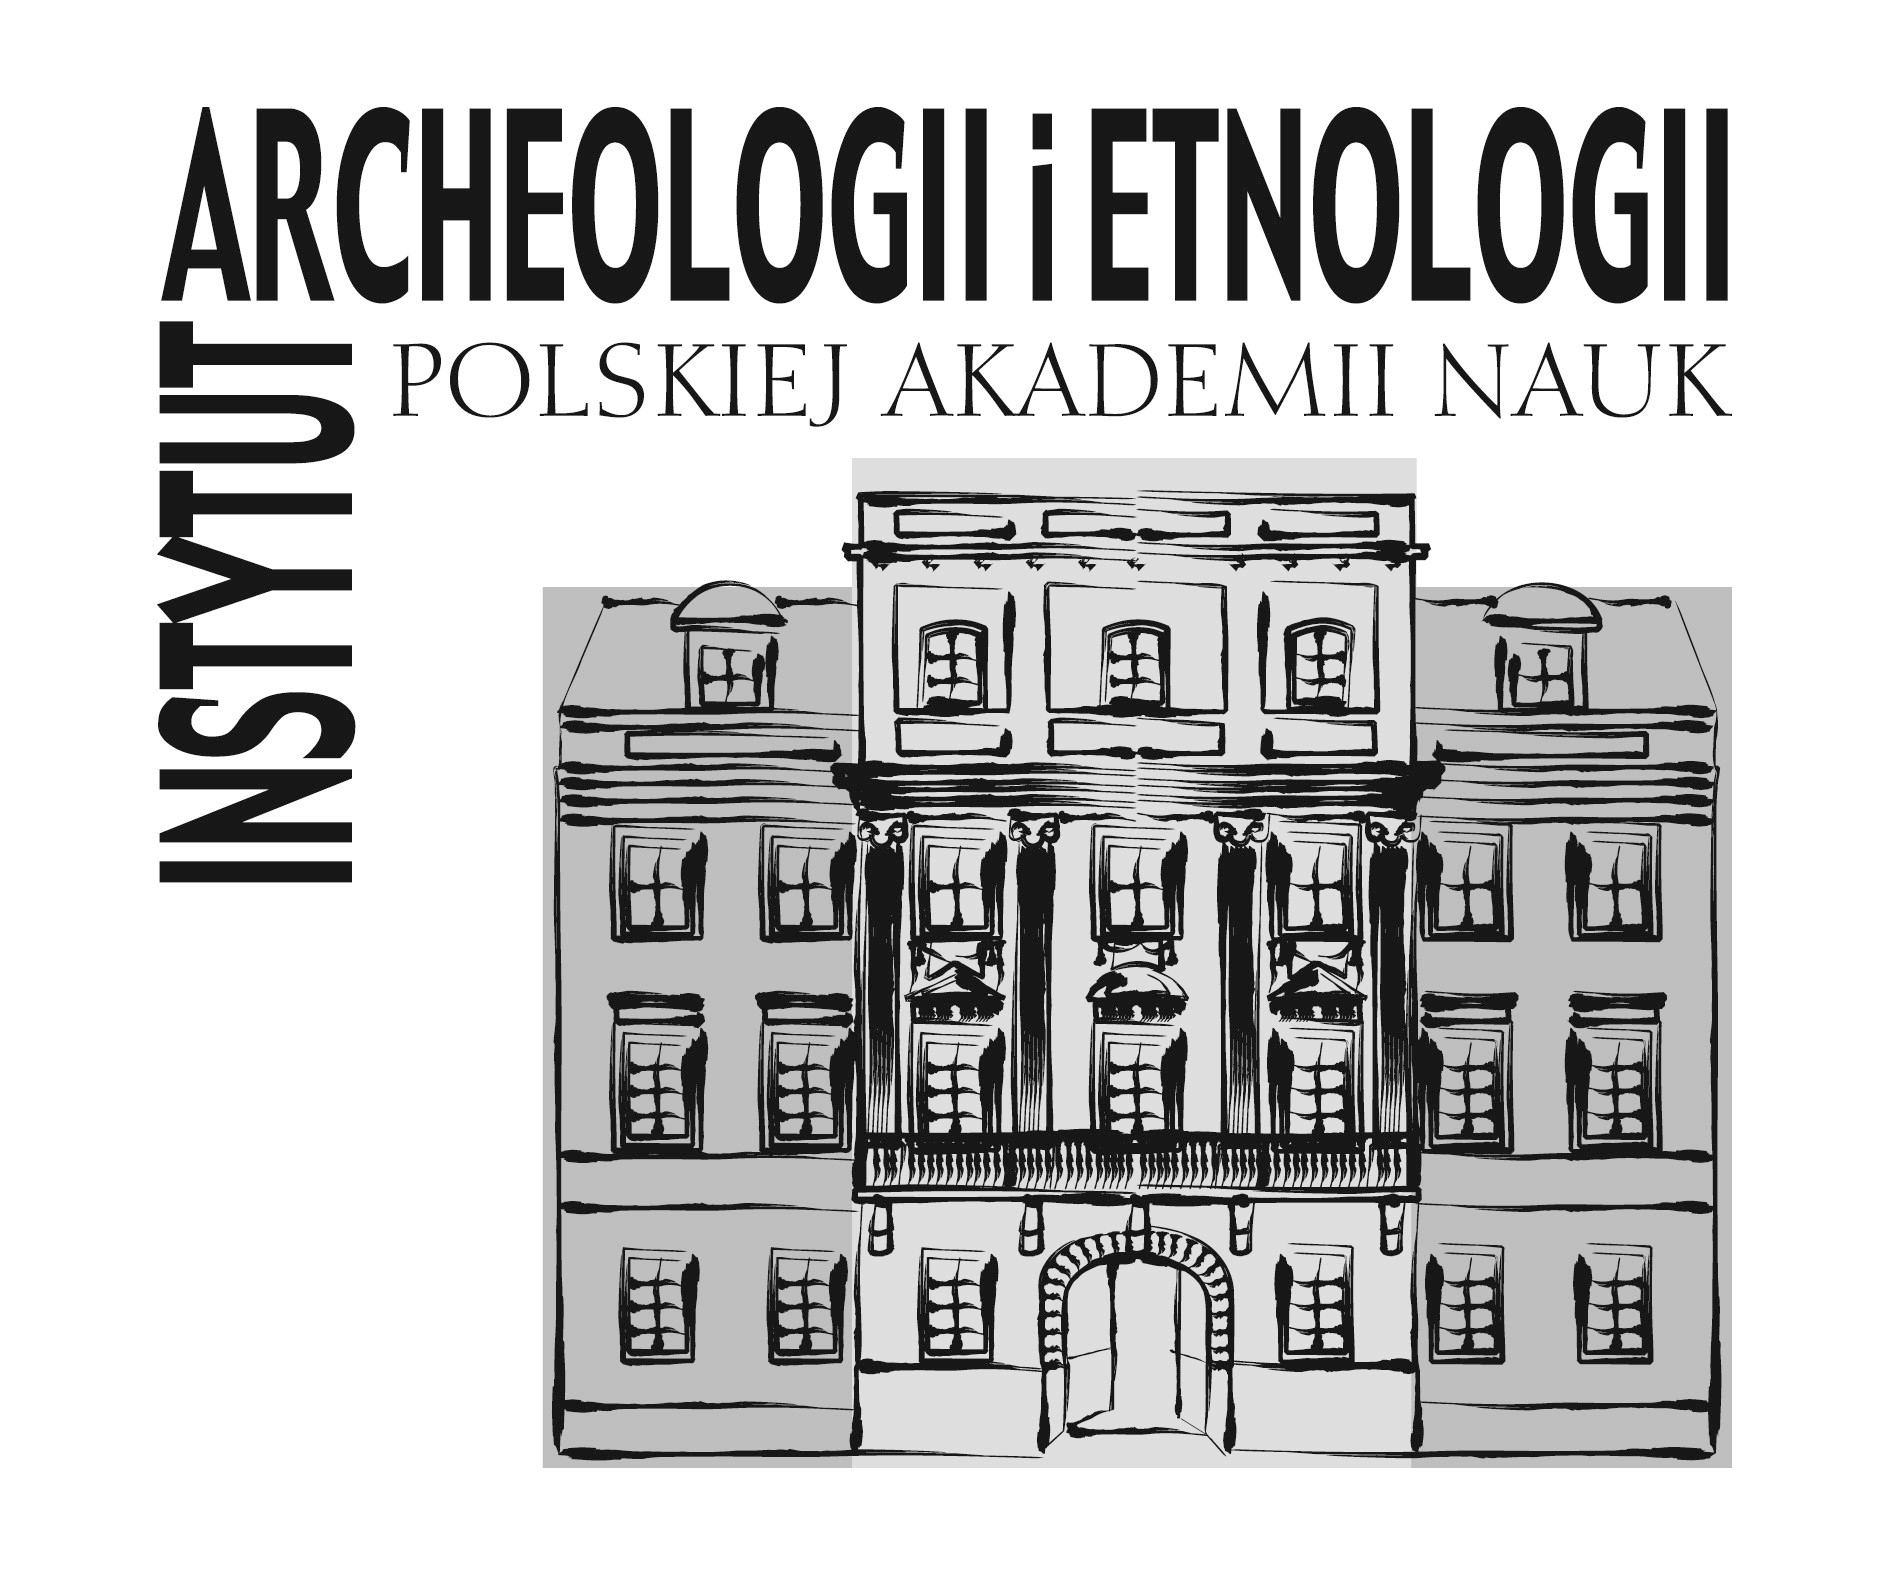 Institute of Archaeology and Ethnology